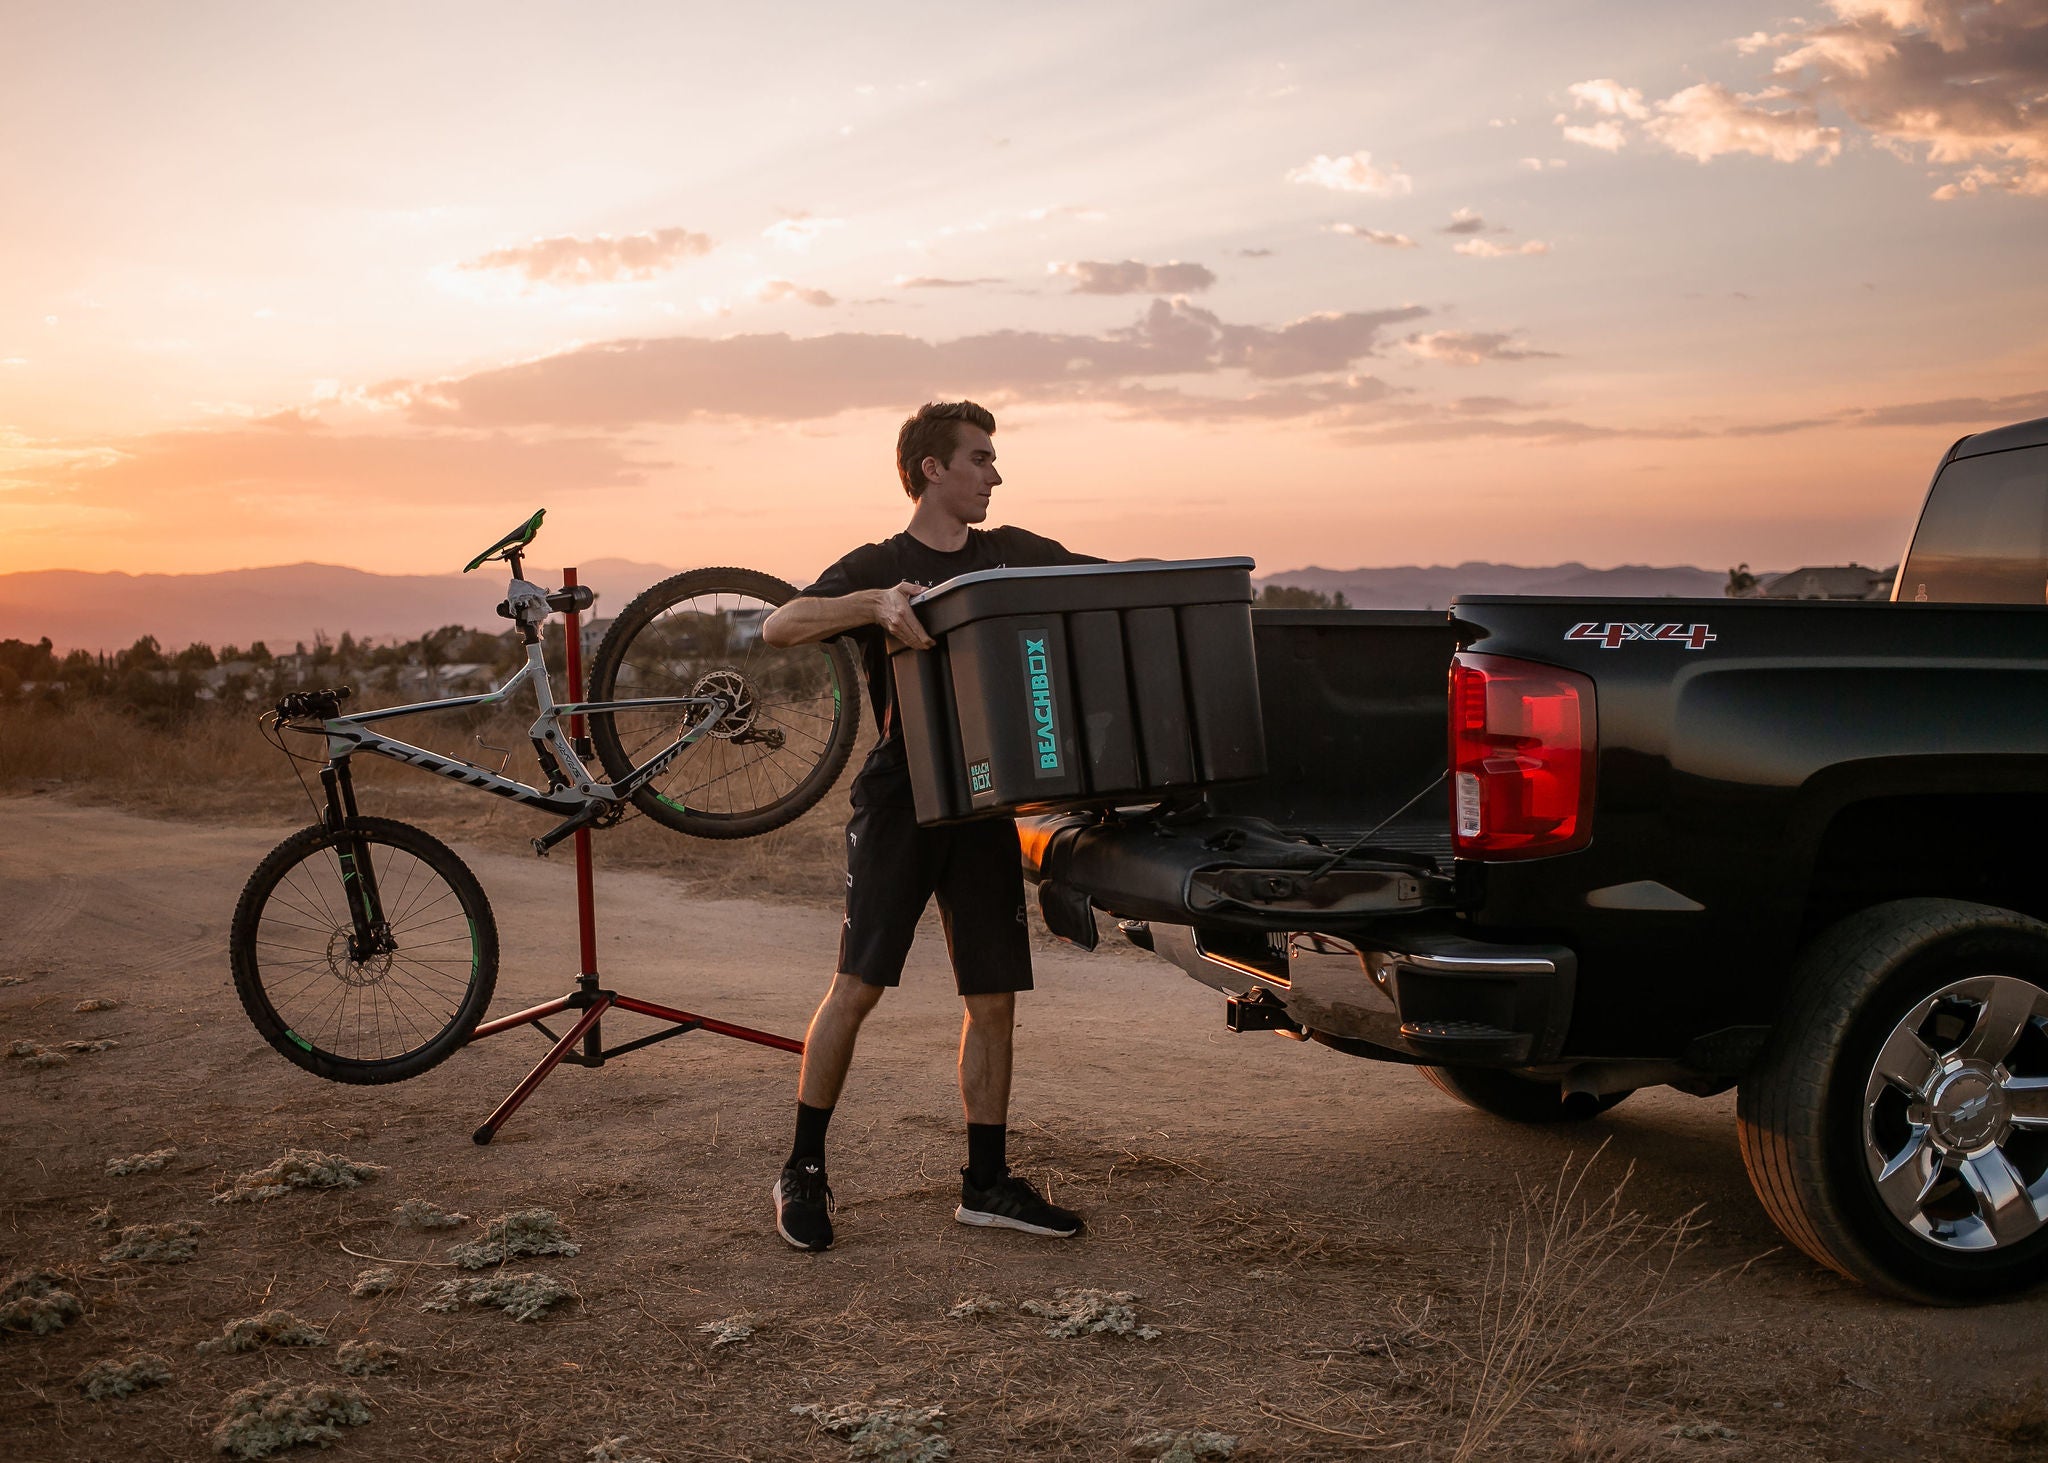 The Beachbox is the ultimate portable shower rinse kit for a mountain bike ride